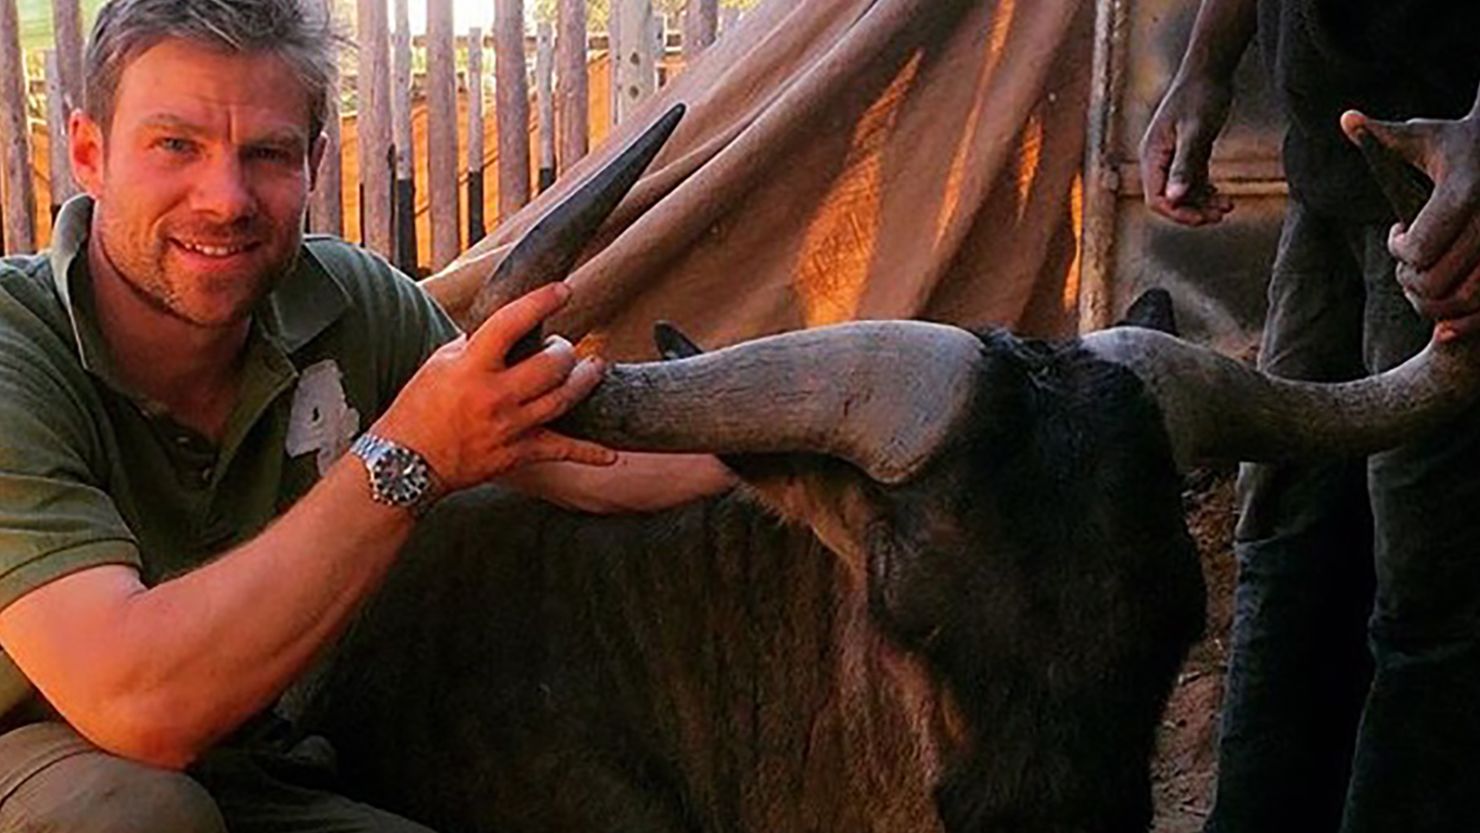 Vet Jonathan Cranston with wildebeest that may have infected him with zoonotic TB.